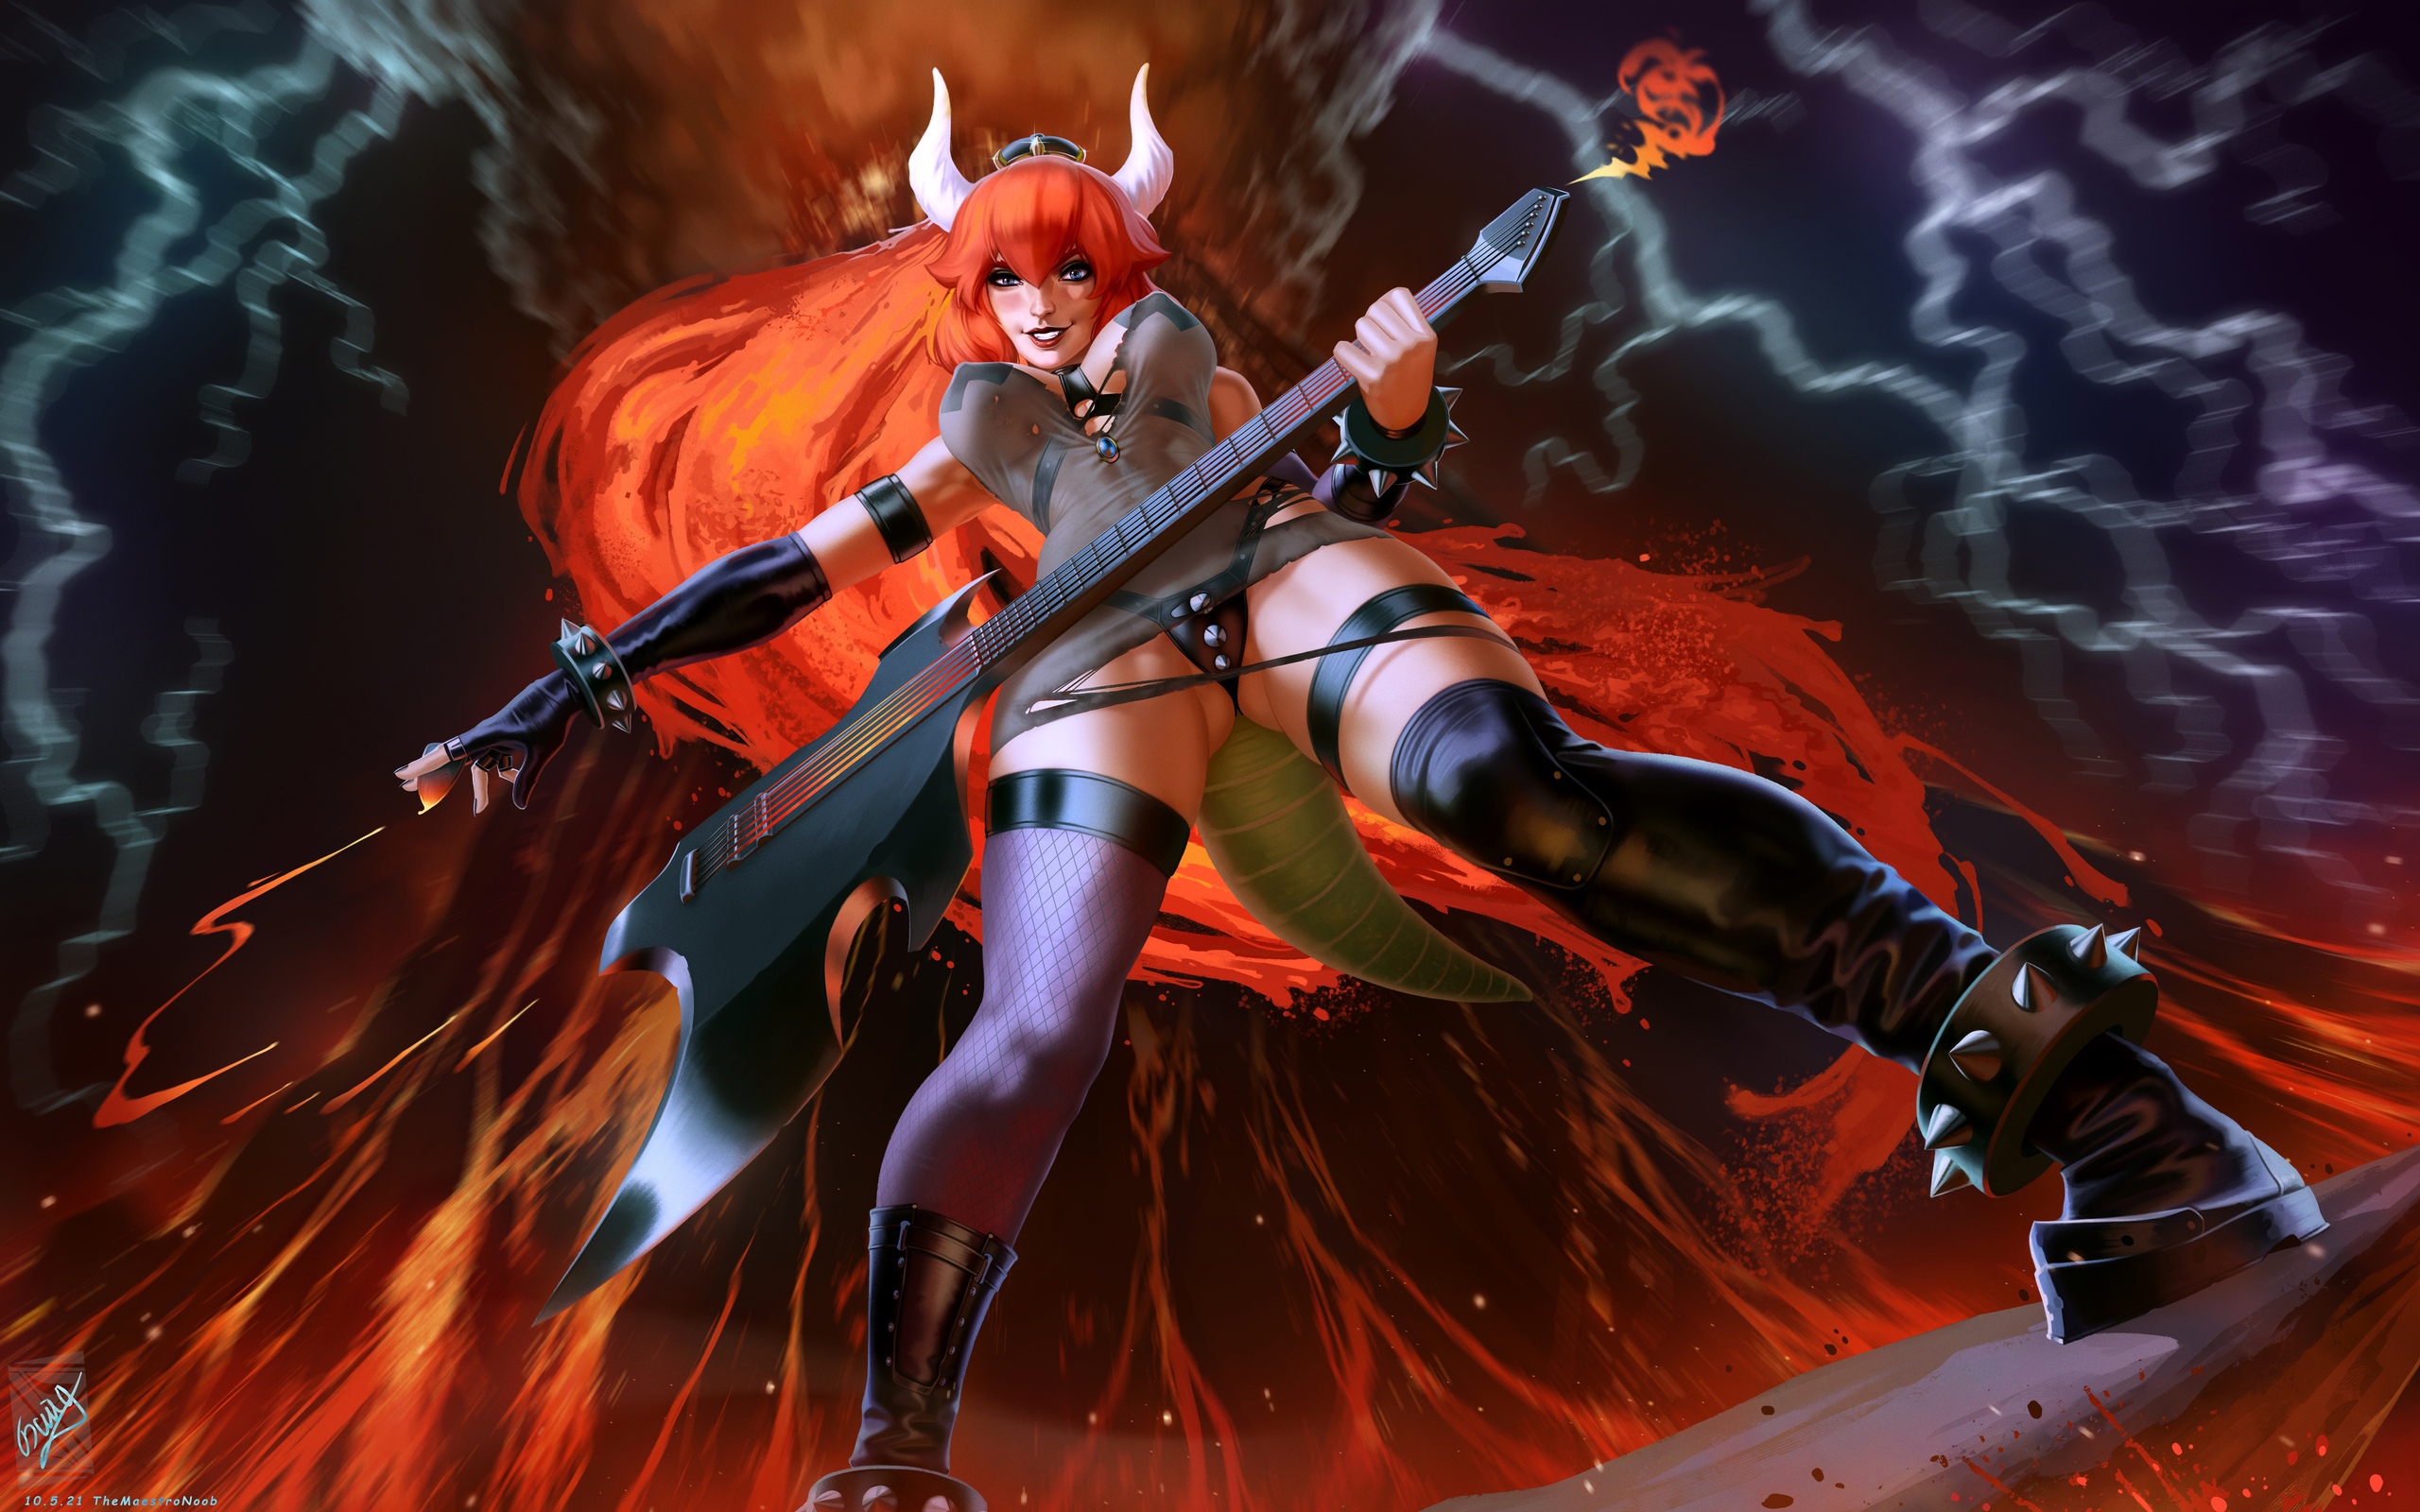 General 2560x1600 digital art fantasy girl underwear anime girls Bowsette body harness tail redhead thighs spike  long hair taped nipples big boobs low-angle lightning night smiling horns guitar spike bracelets gloves elbow gloves fire lava mountains black boots TheMaestroNoob